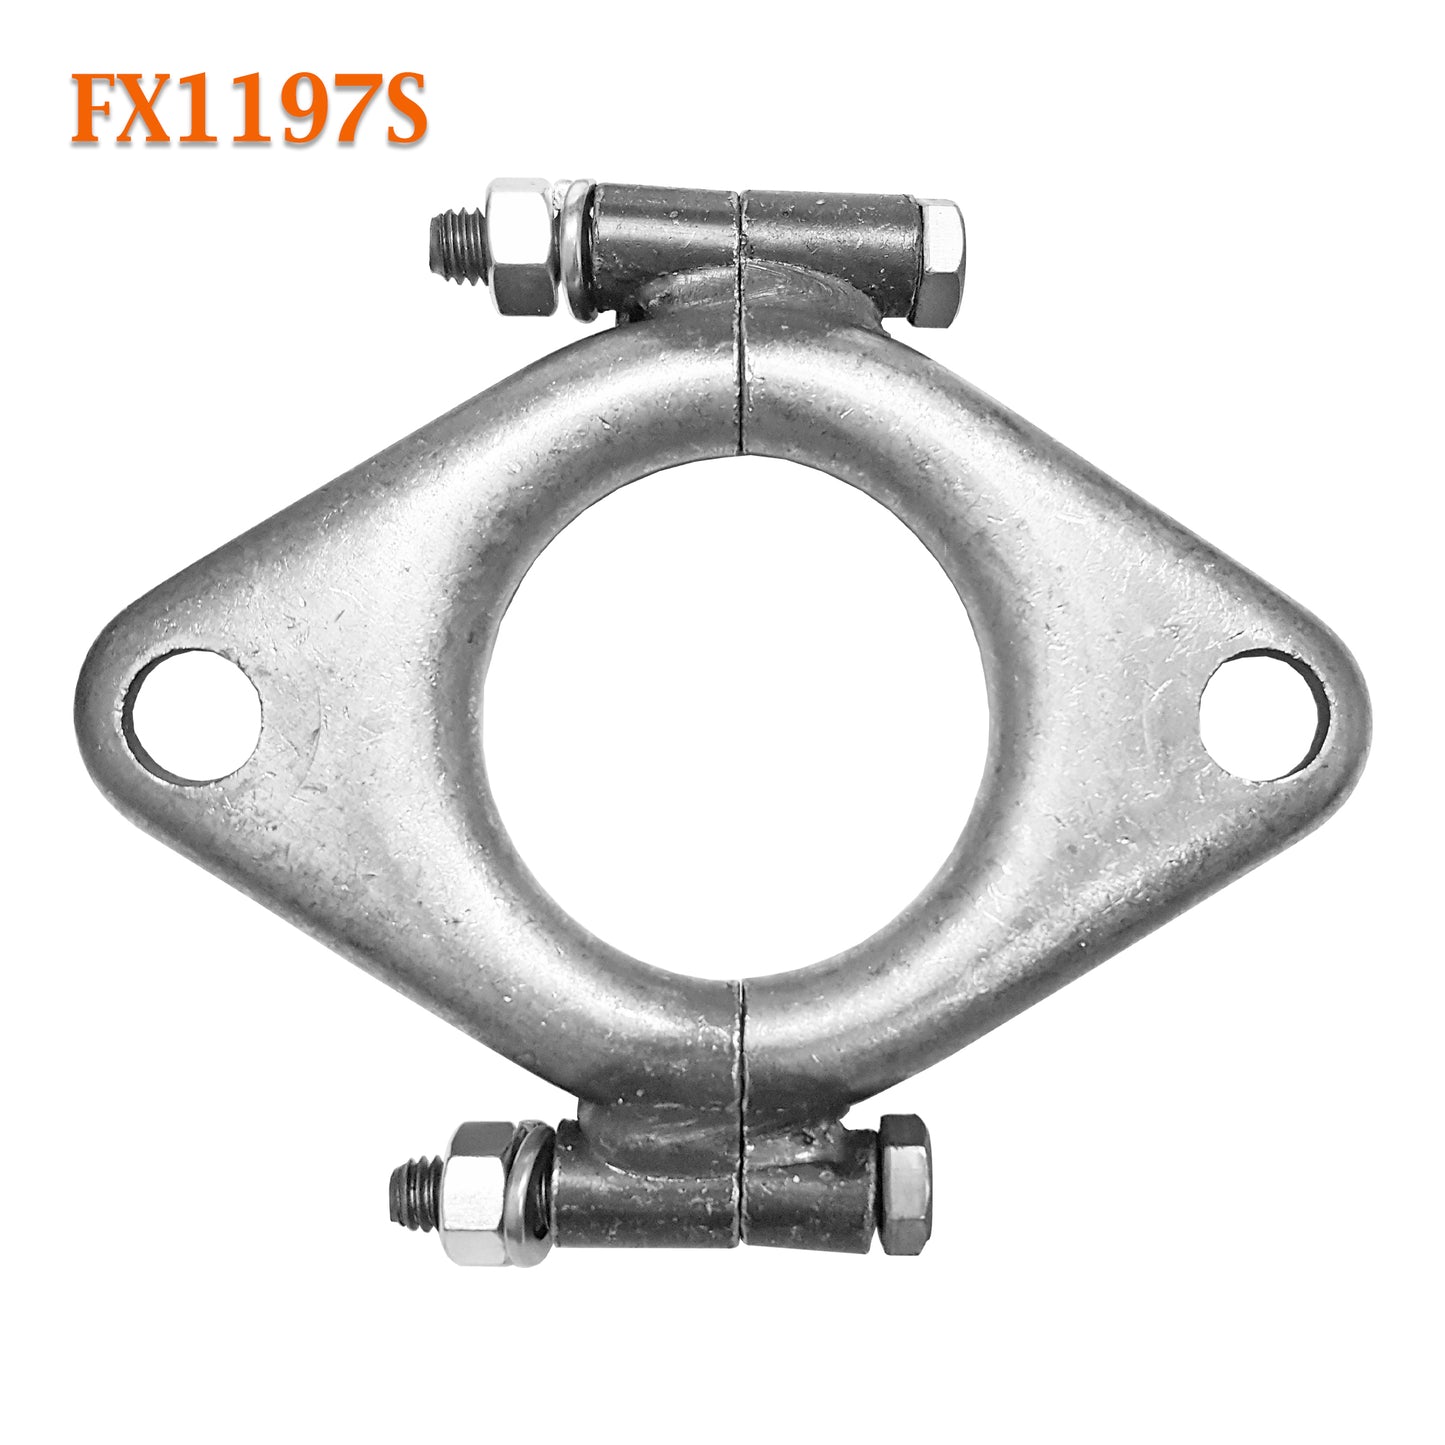 FX1197S 2" ID Exhaust Flange Manifold Formed Oval Side Split Repair Replacement